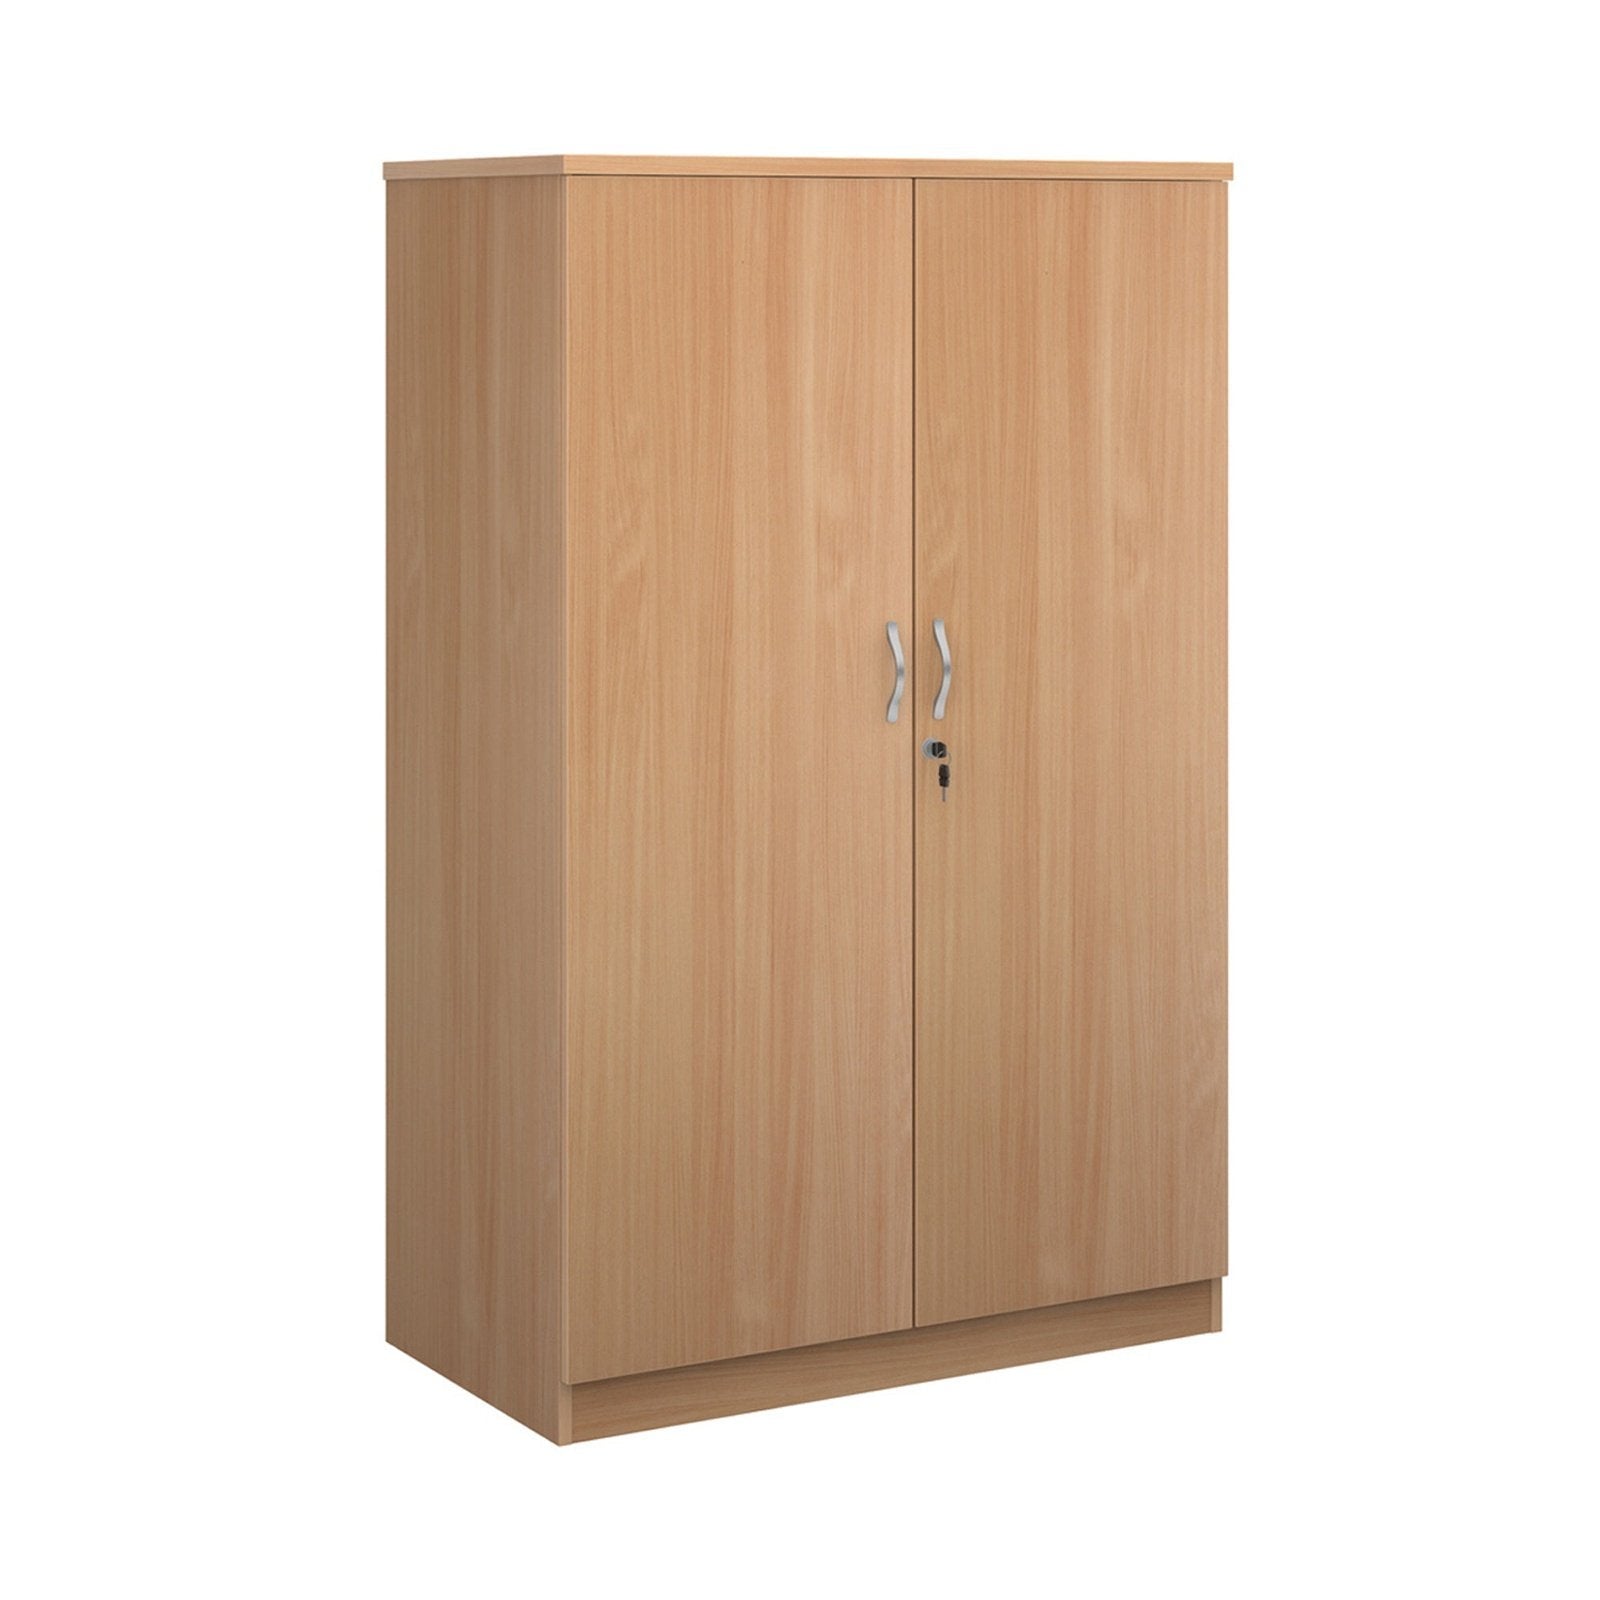 Systems double door cupboard - Office Products Online